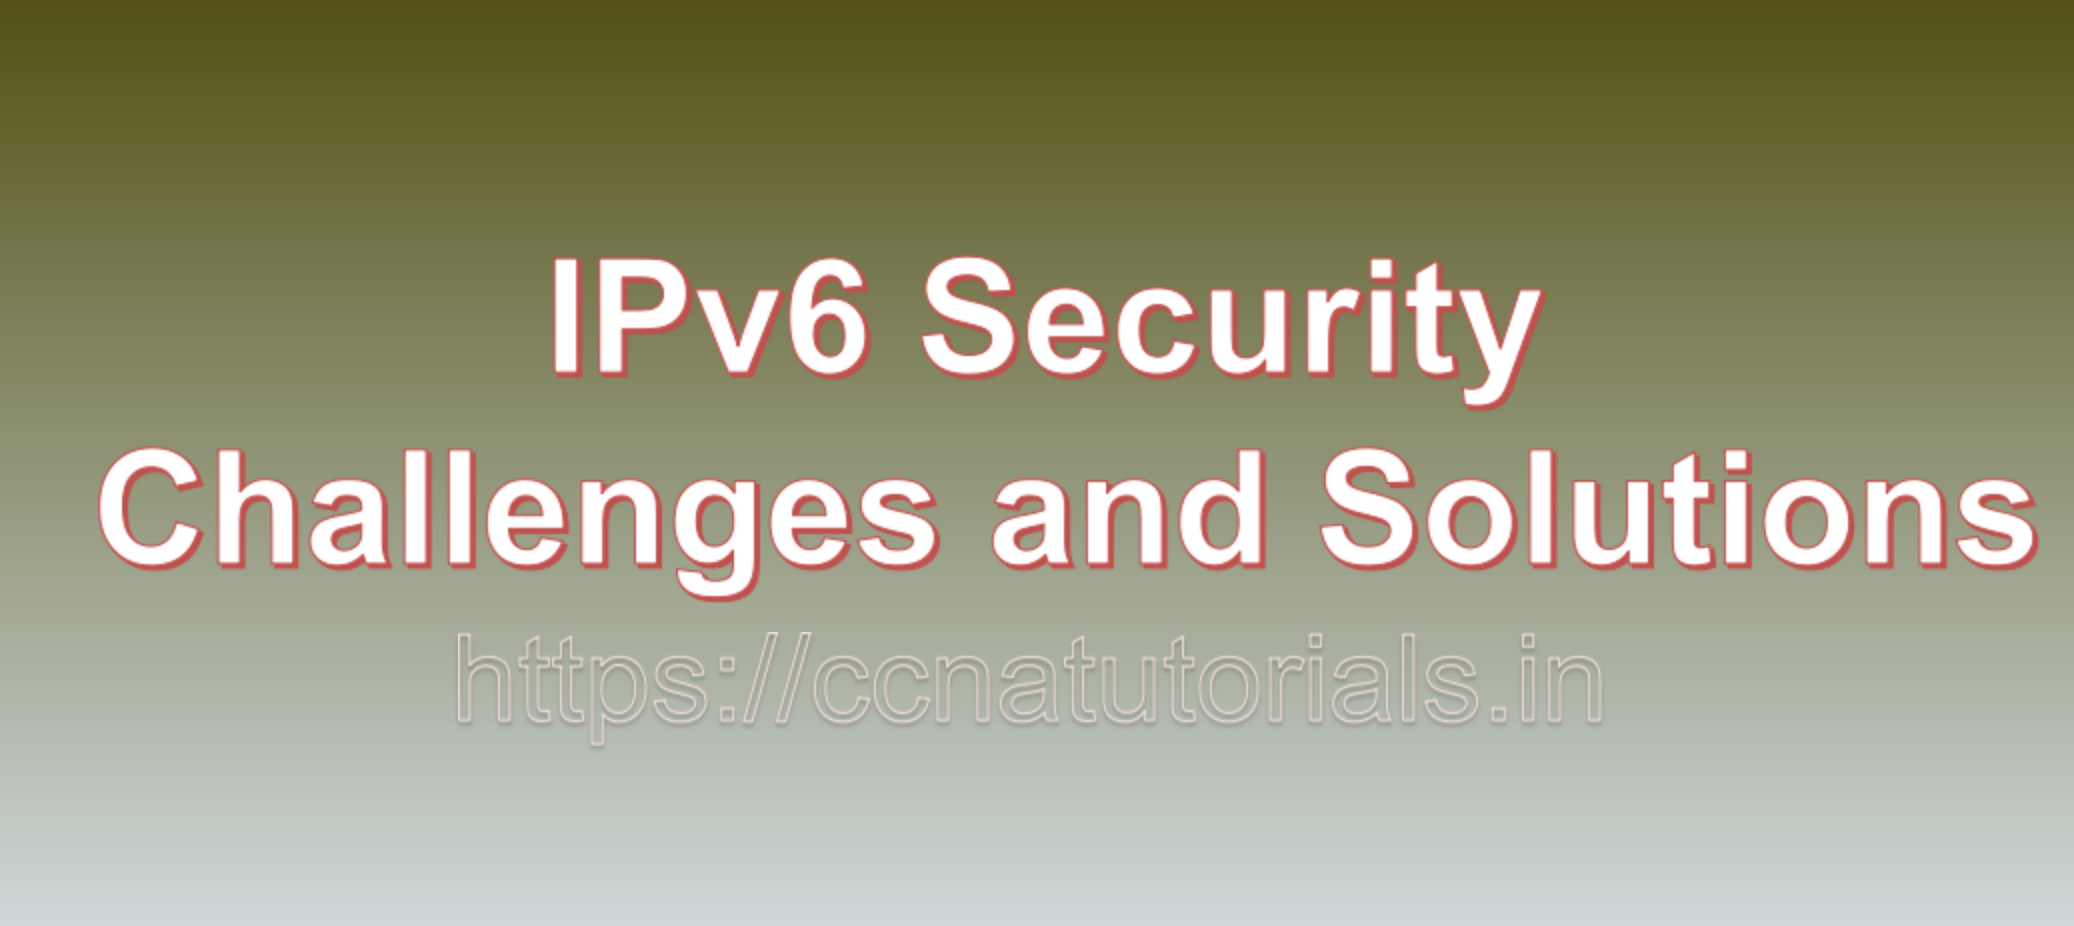 IPv6 Security Challenges and Solutions, ccna, ccna tutorials